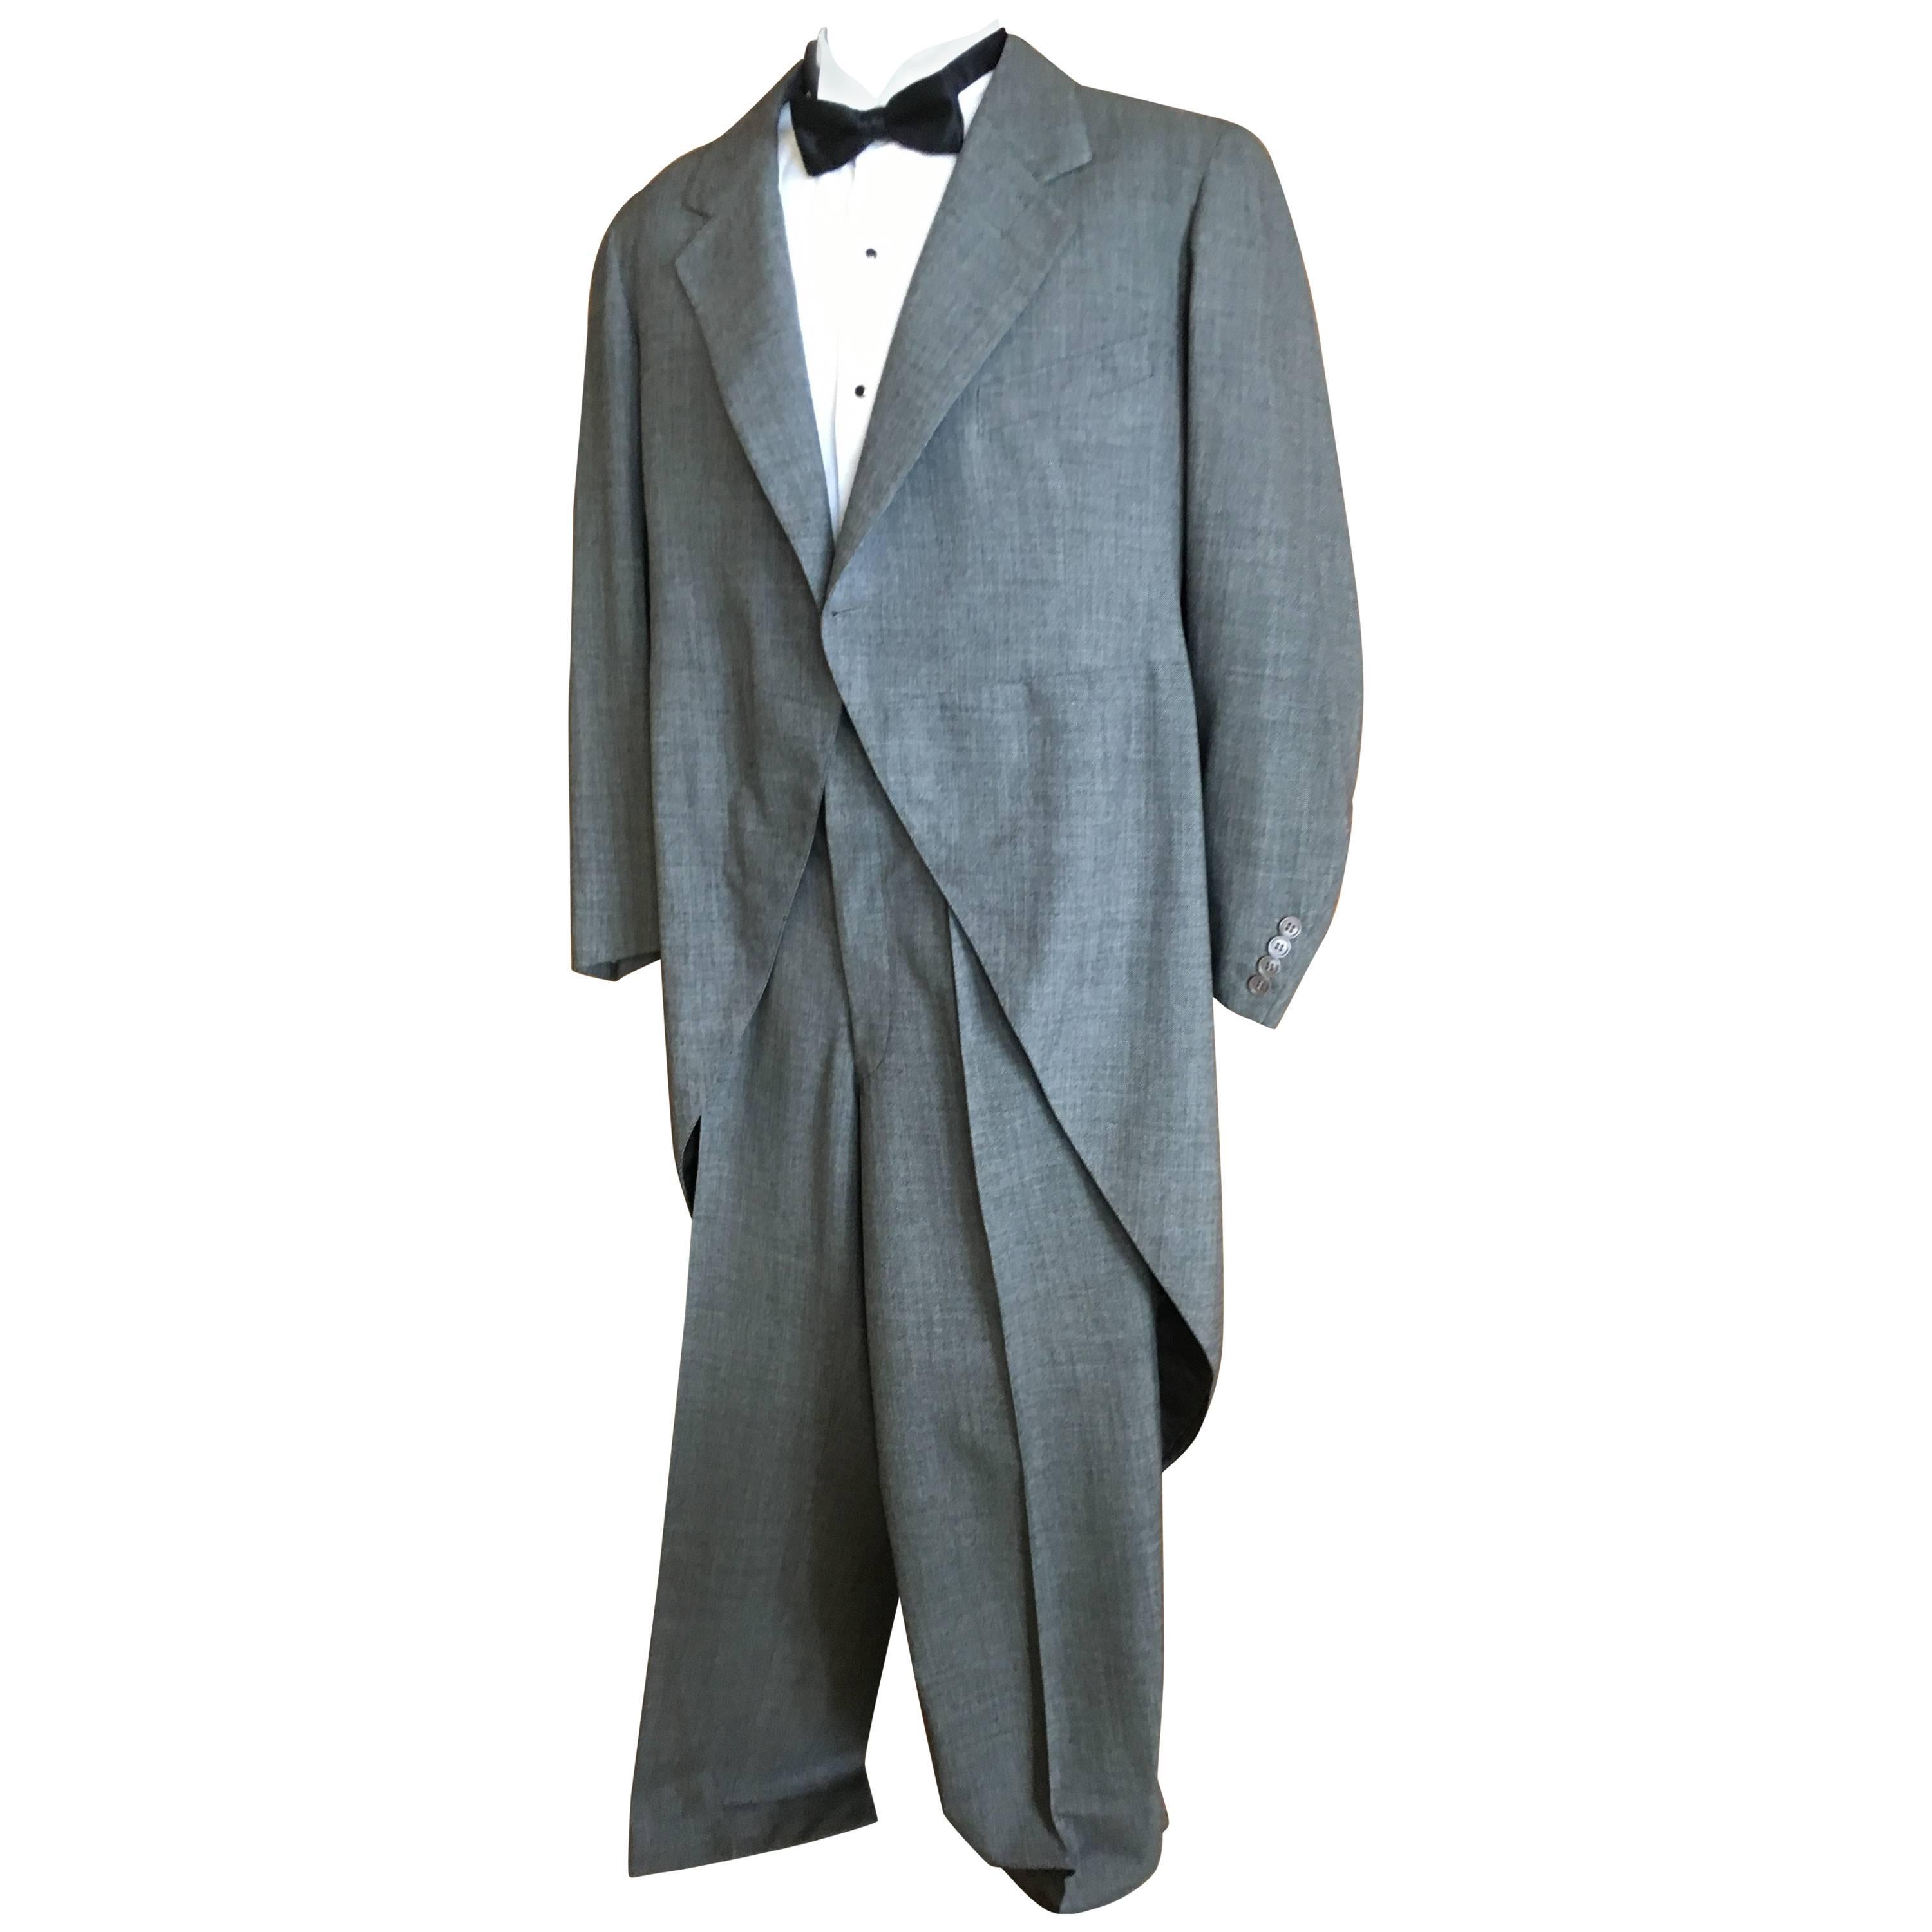 1941 Men's Gray Formal Cutaway Tailcoat Suit Dunne & Co. For Sale